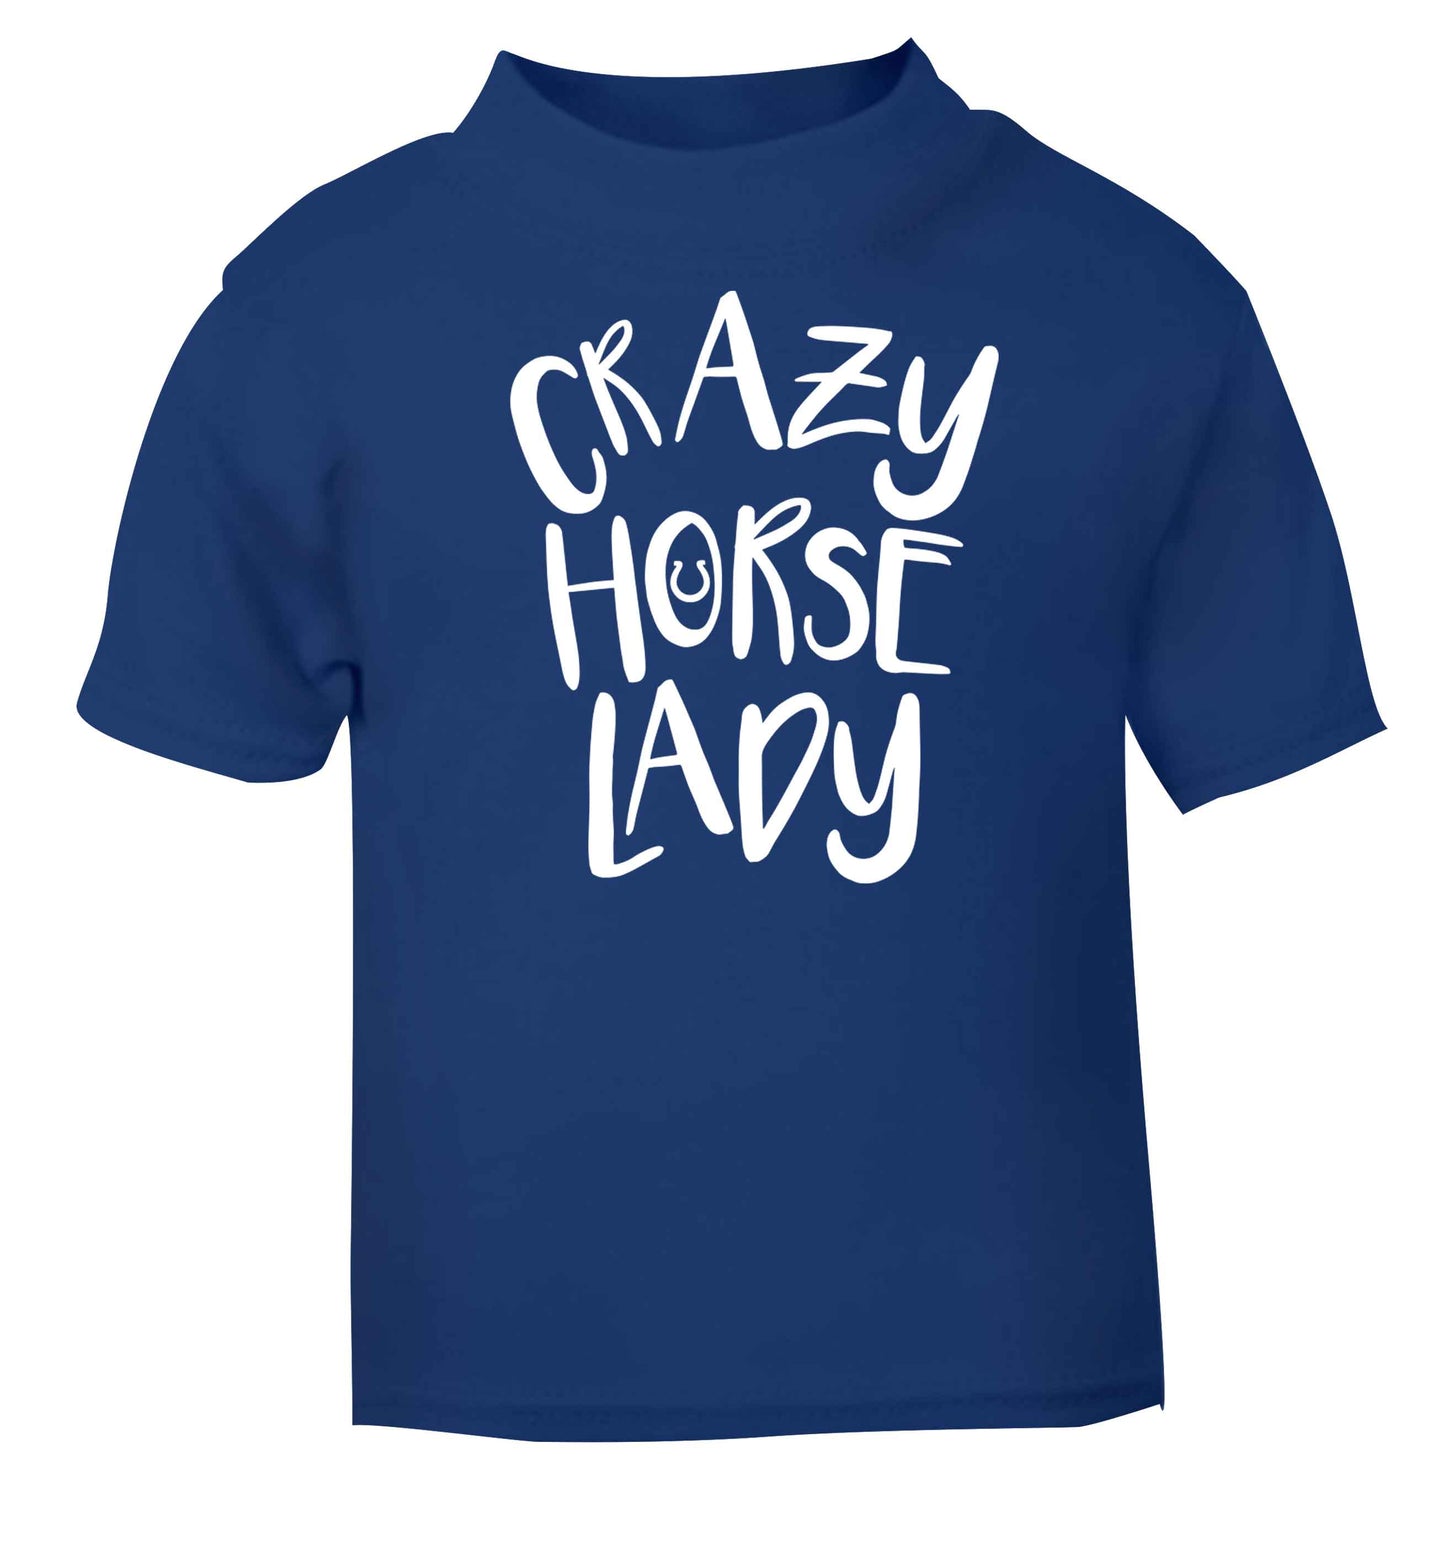 Crazy horse lady blue baby toddler Tshirt 2 Years